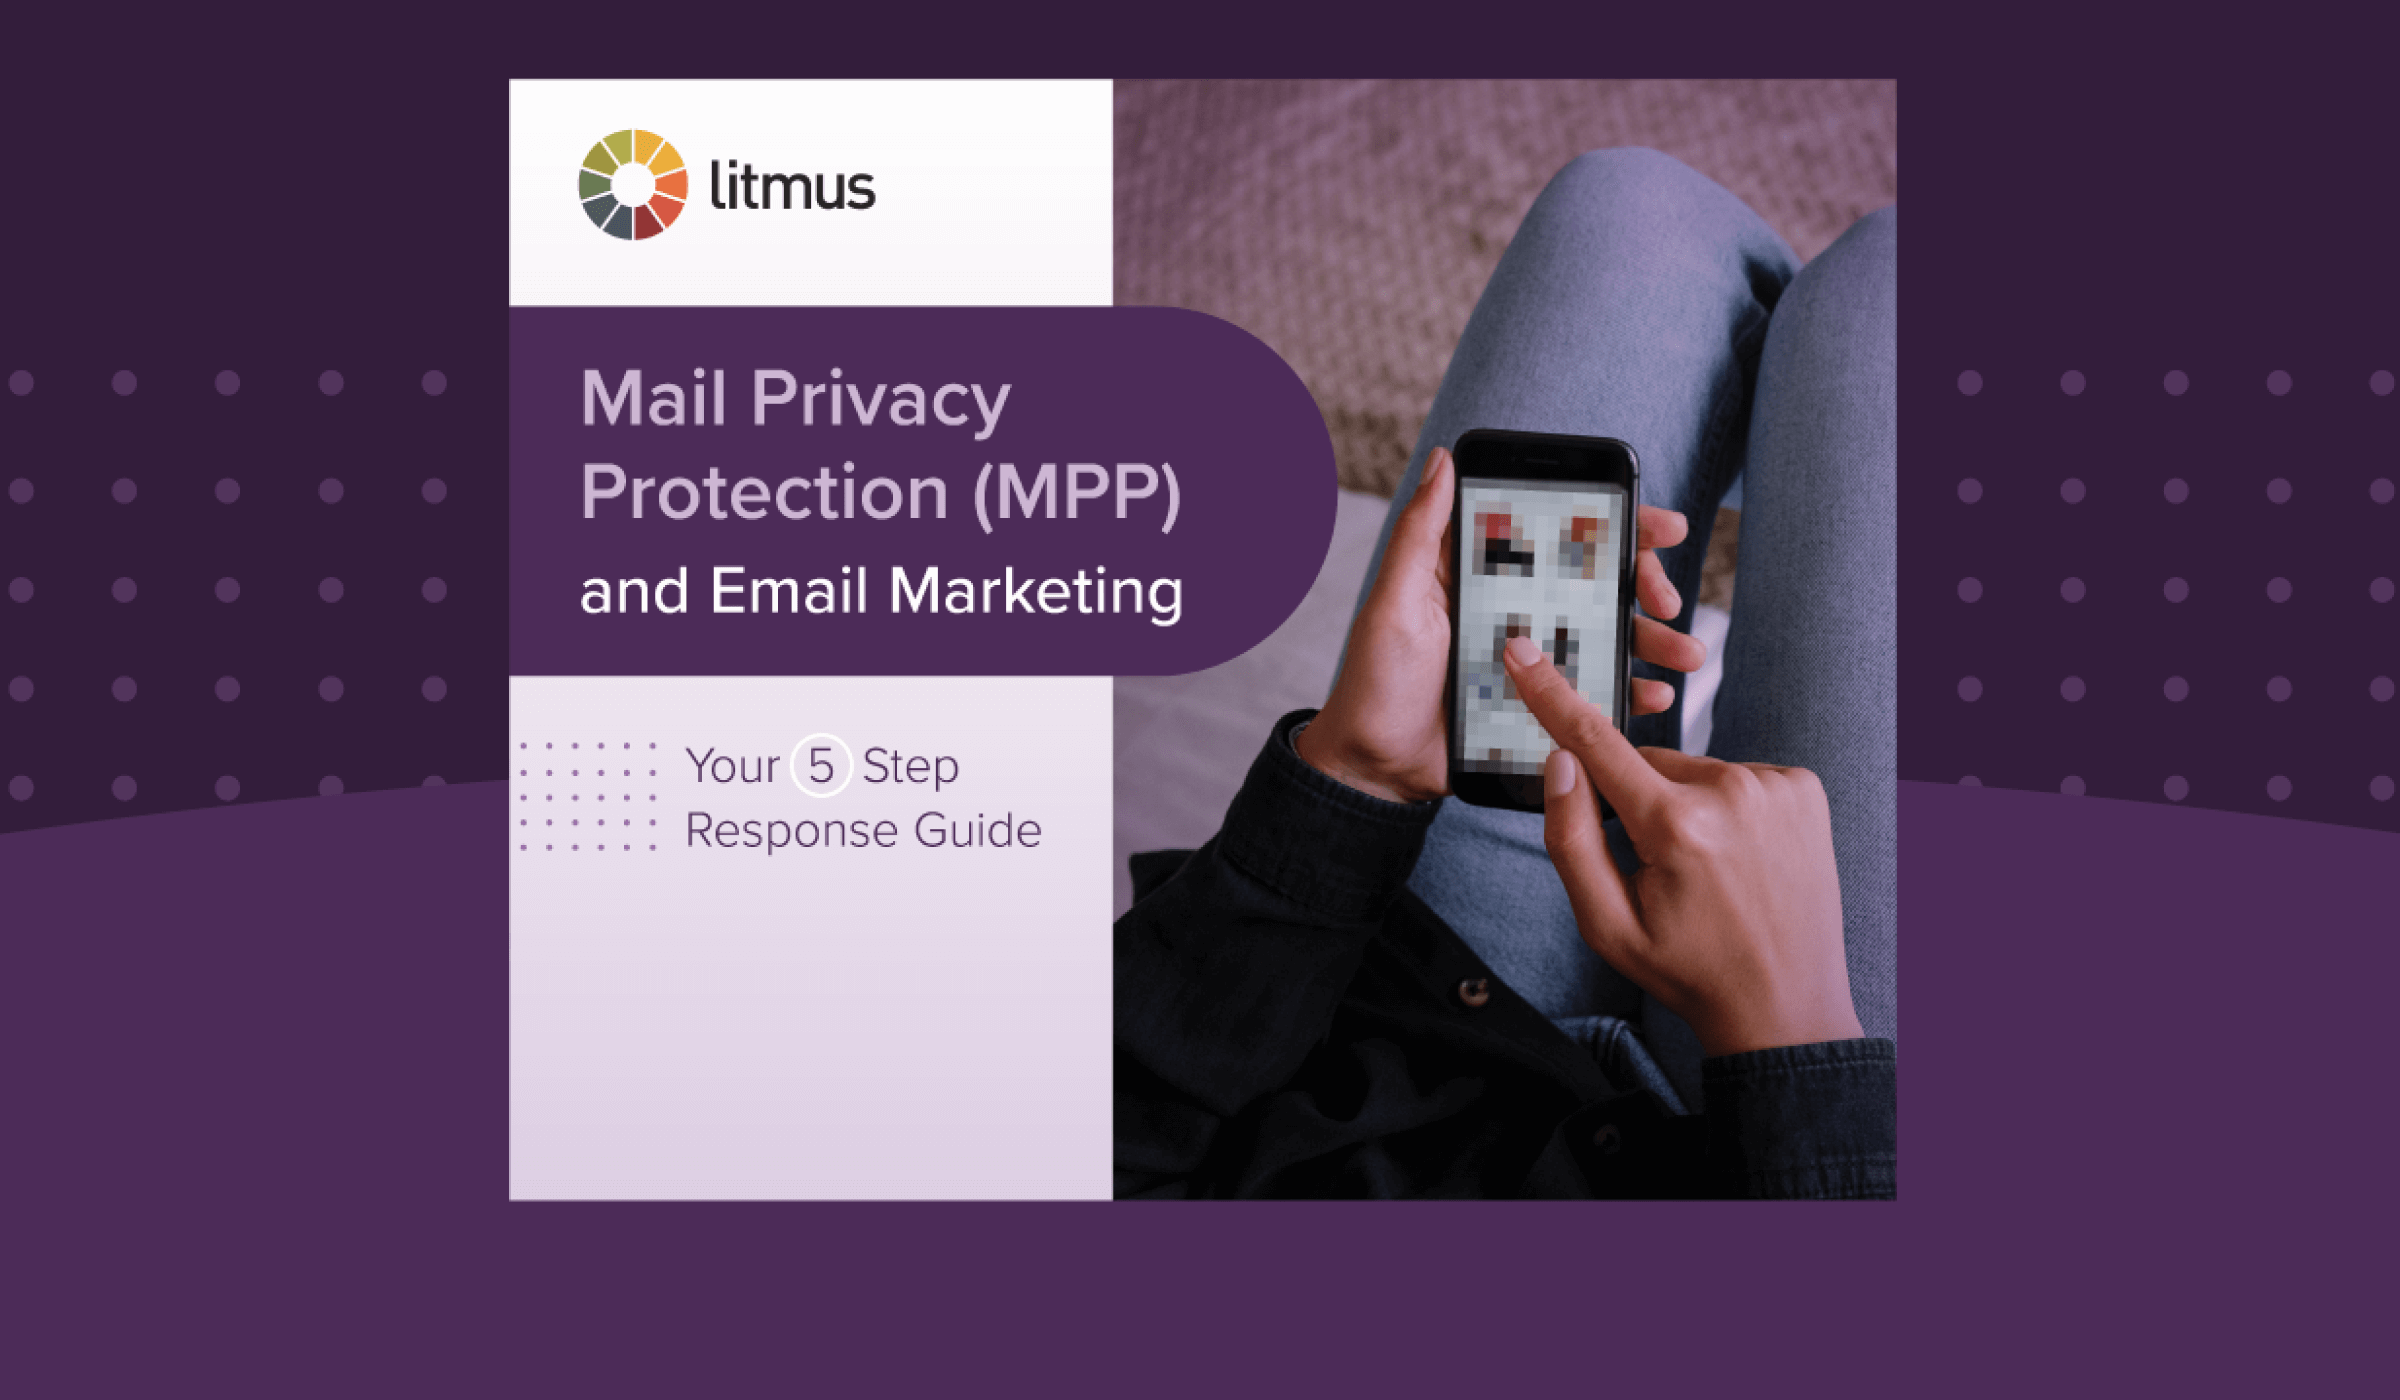 The Mail Privacy Protection Guide